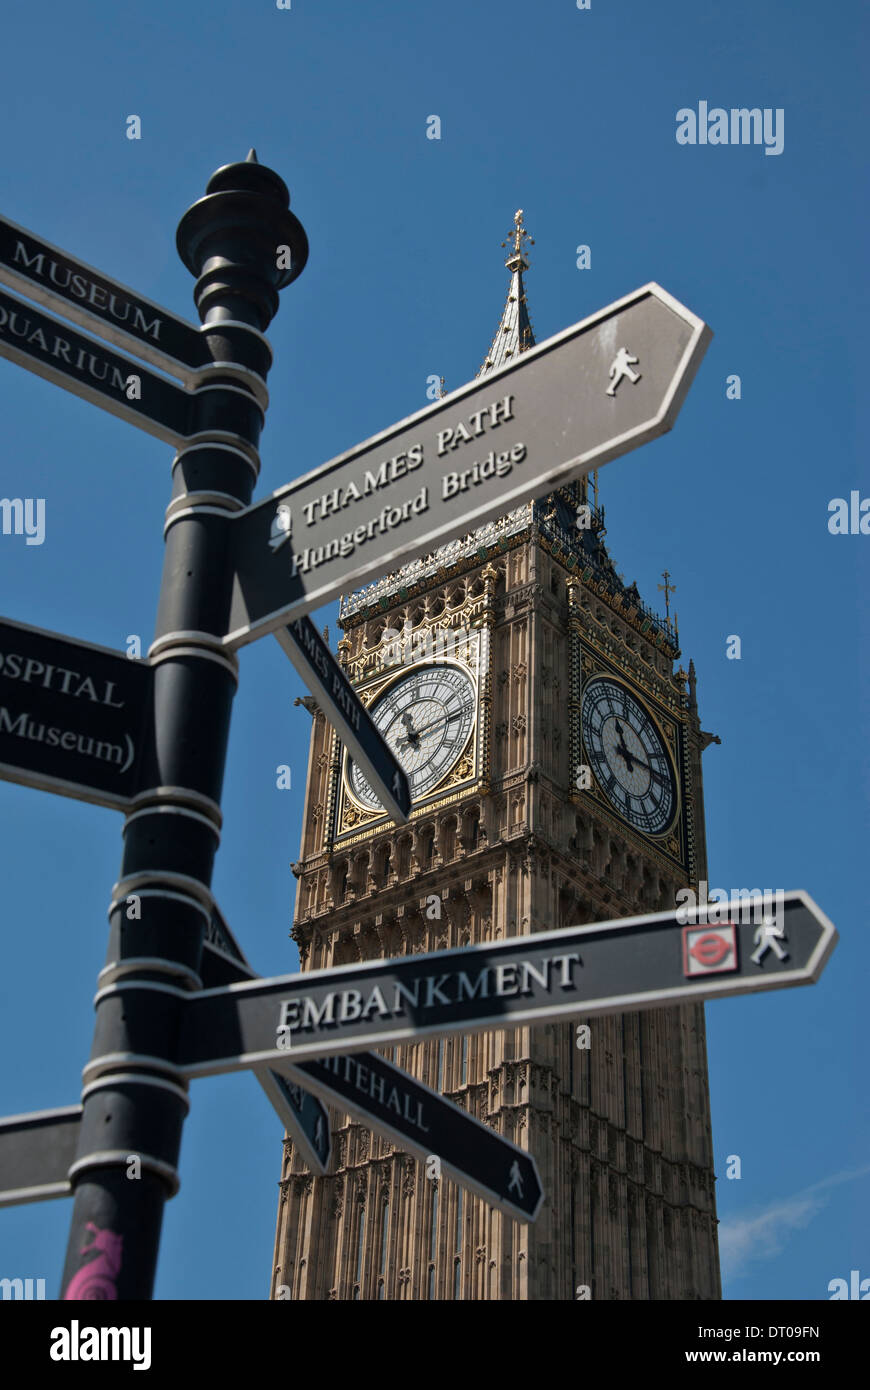 The tower of Big Ben at Westminster with the clock saying 11.15 and a tourist signpost giving directions to the embankment. Stock Photo